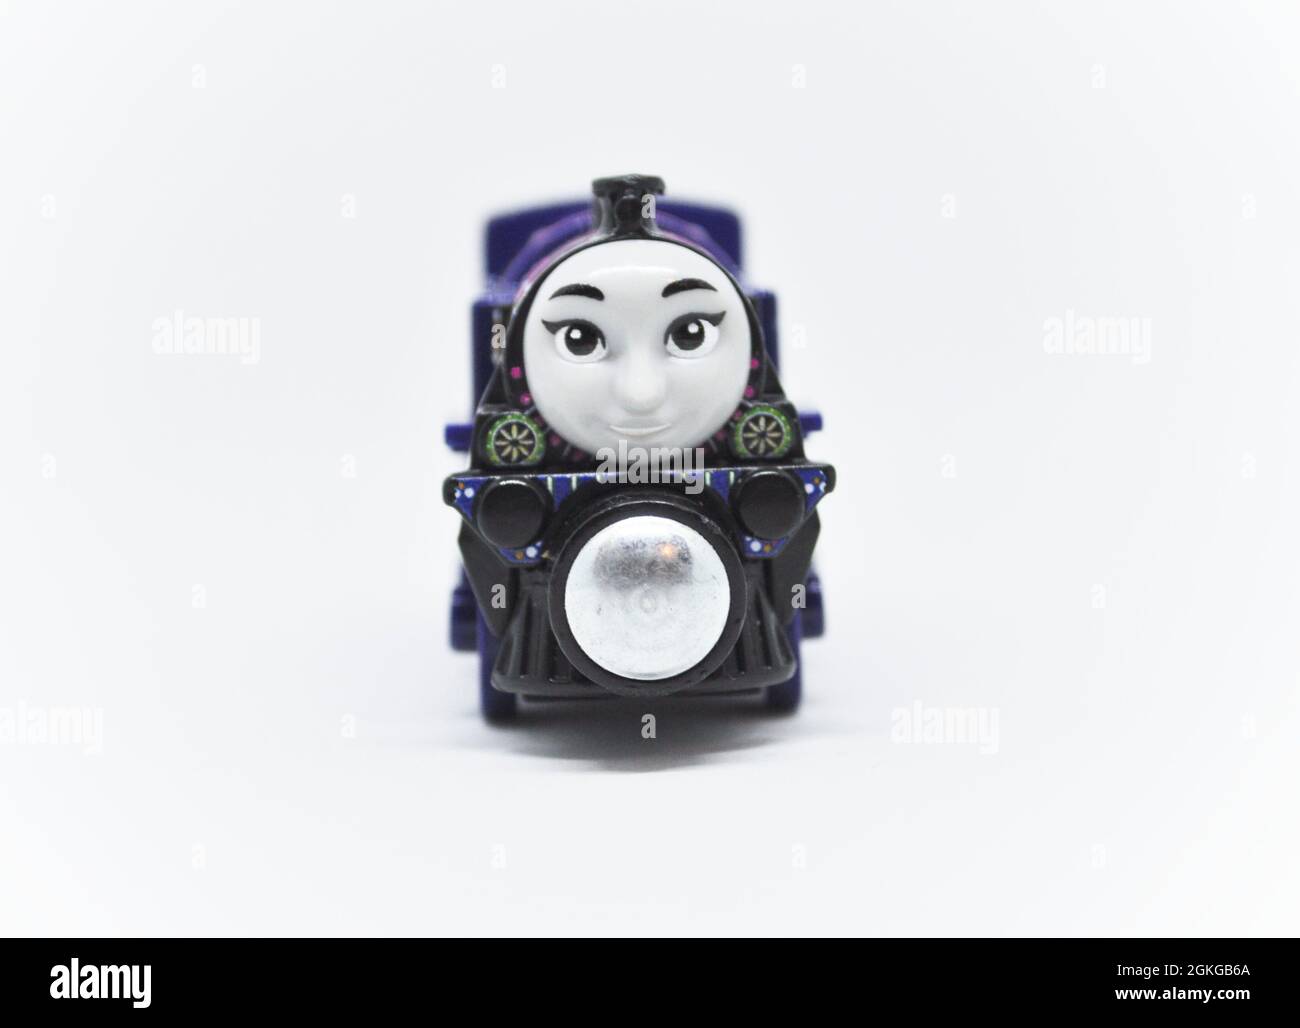 Ashima - Thomas and Friends die cast character  set against a white background. Stock Photo